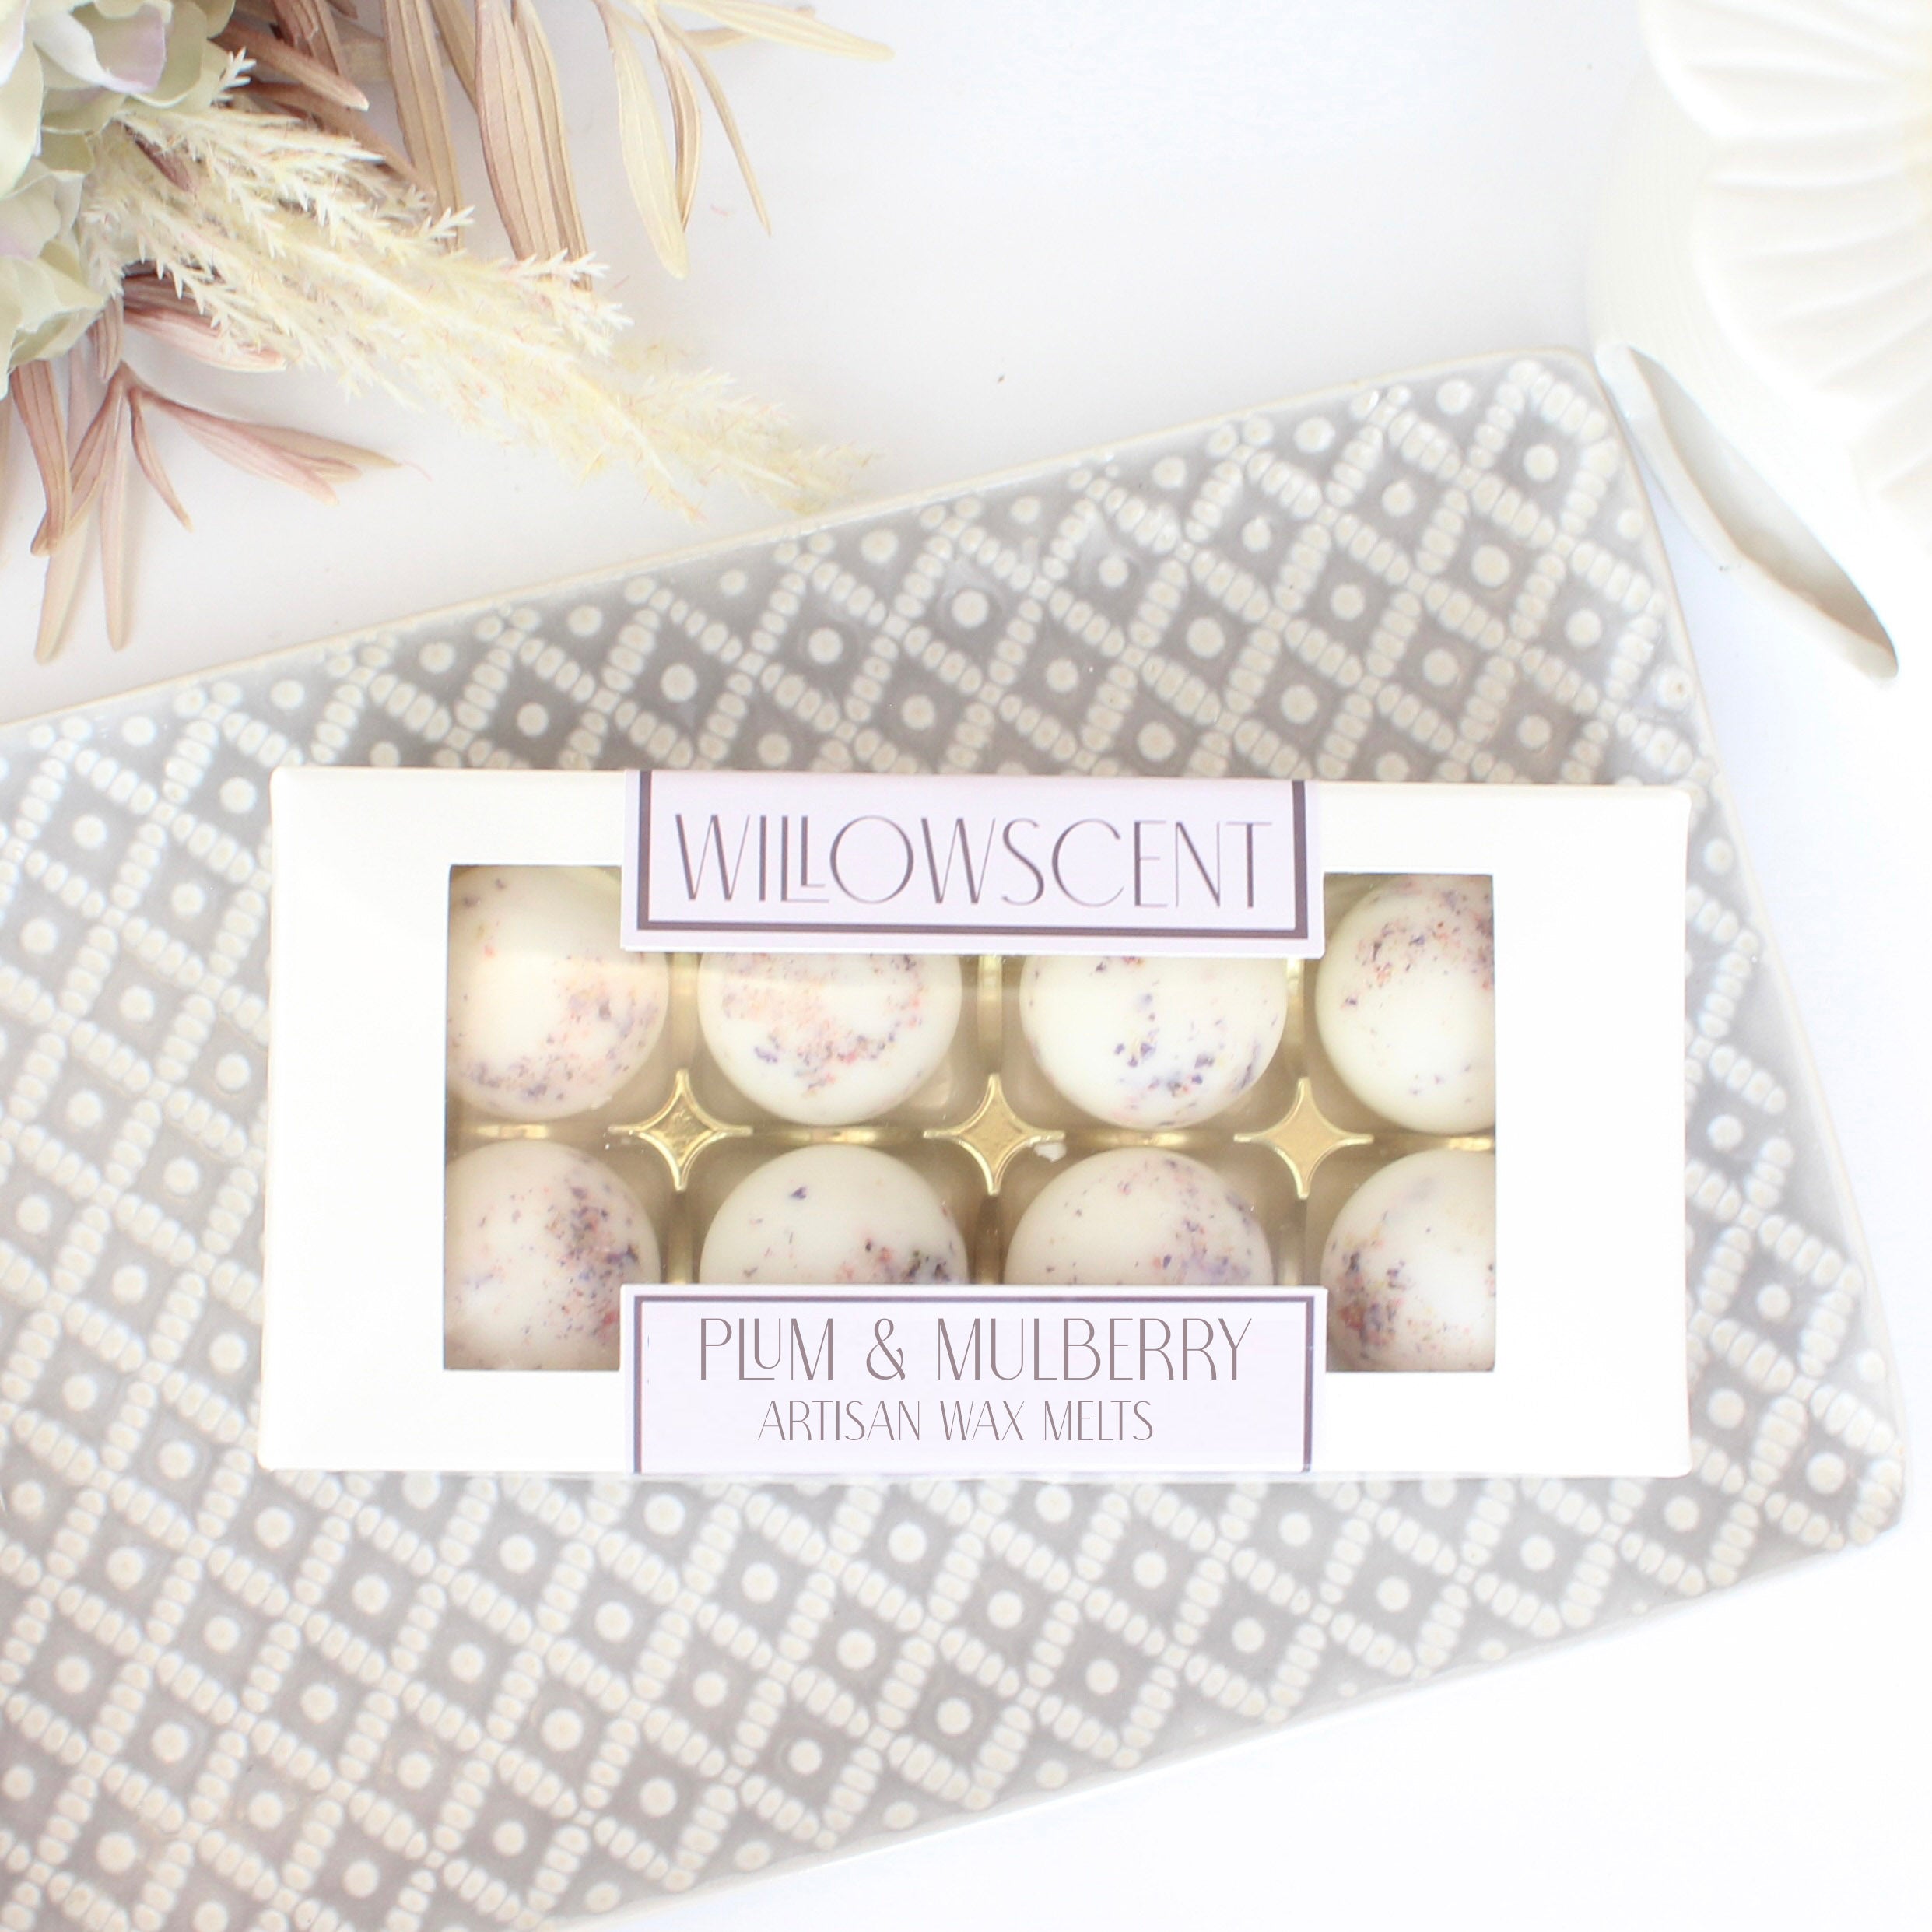 Plum and Mulberry Scented Wax Melts